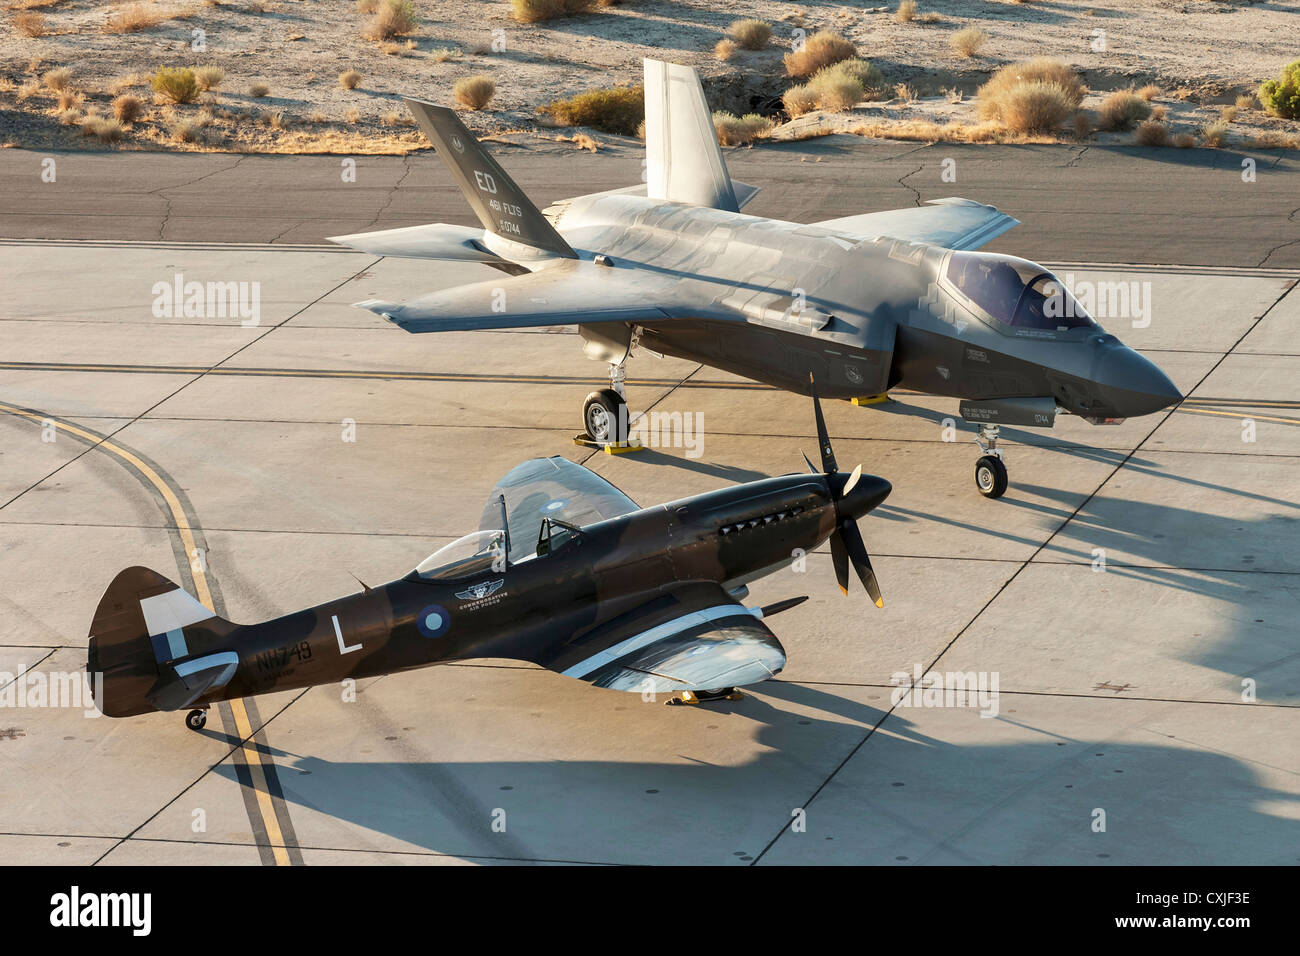 US Air Force F-22 Raptor stealth fighter aircraft next to a World War II Spitfire aircraft at Edwards Air Force Base September 15, 2012 in Edwards, California. Stock Photo